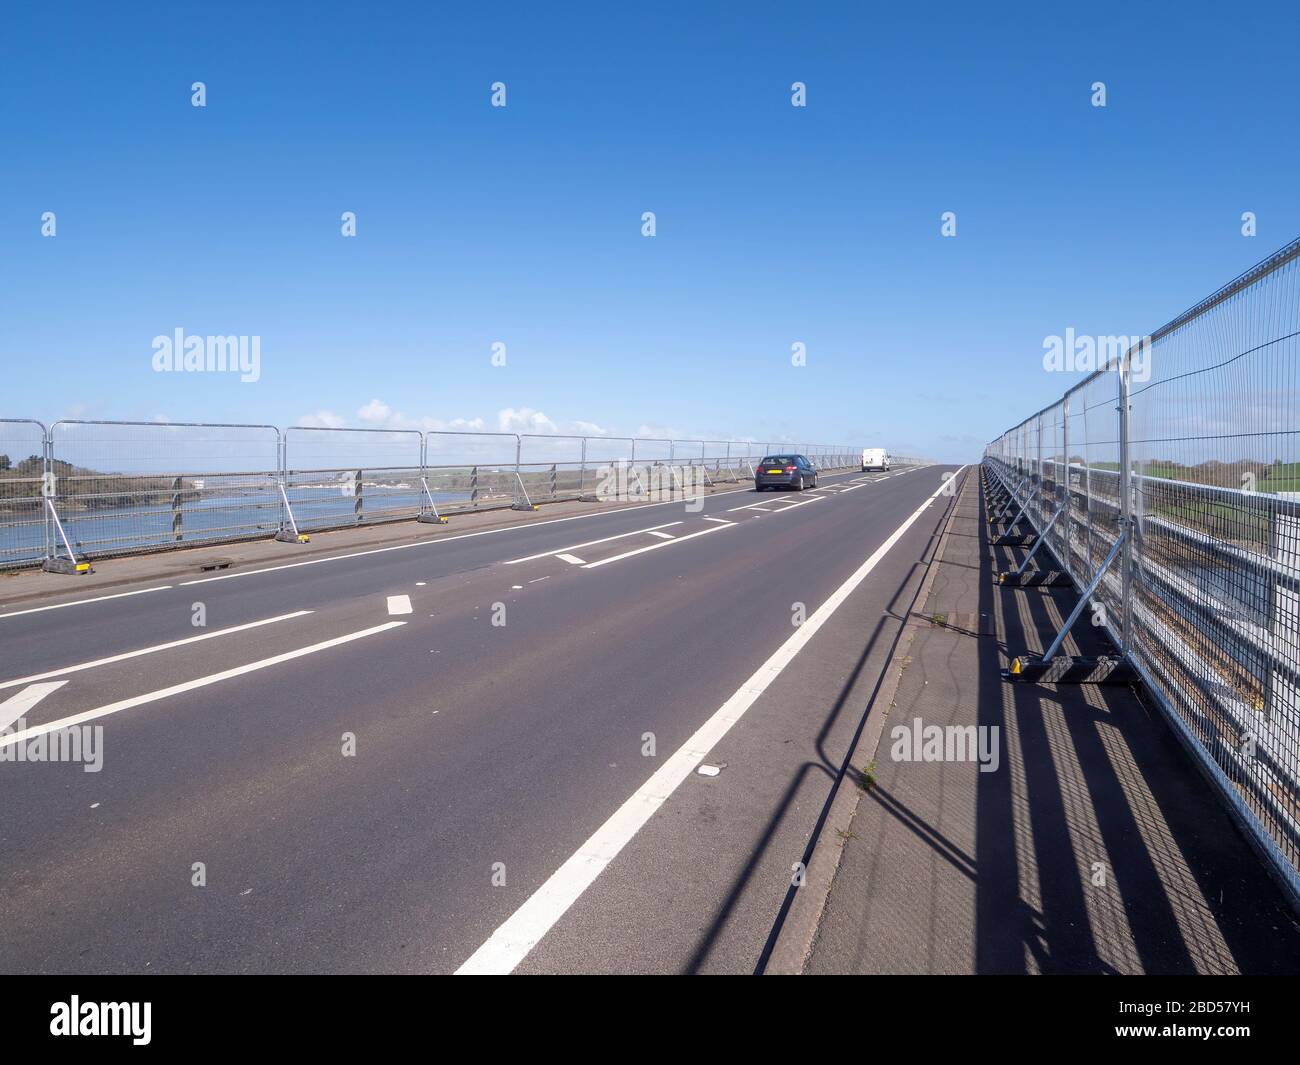 Anti suicide barriers attached to the bridge over the River Torridge at Bideford, north Devon, Fixed April 2020. Unidentifiable cars. Stock Photo